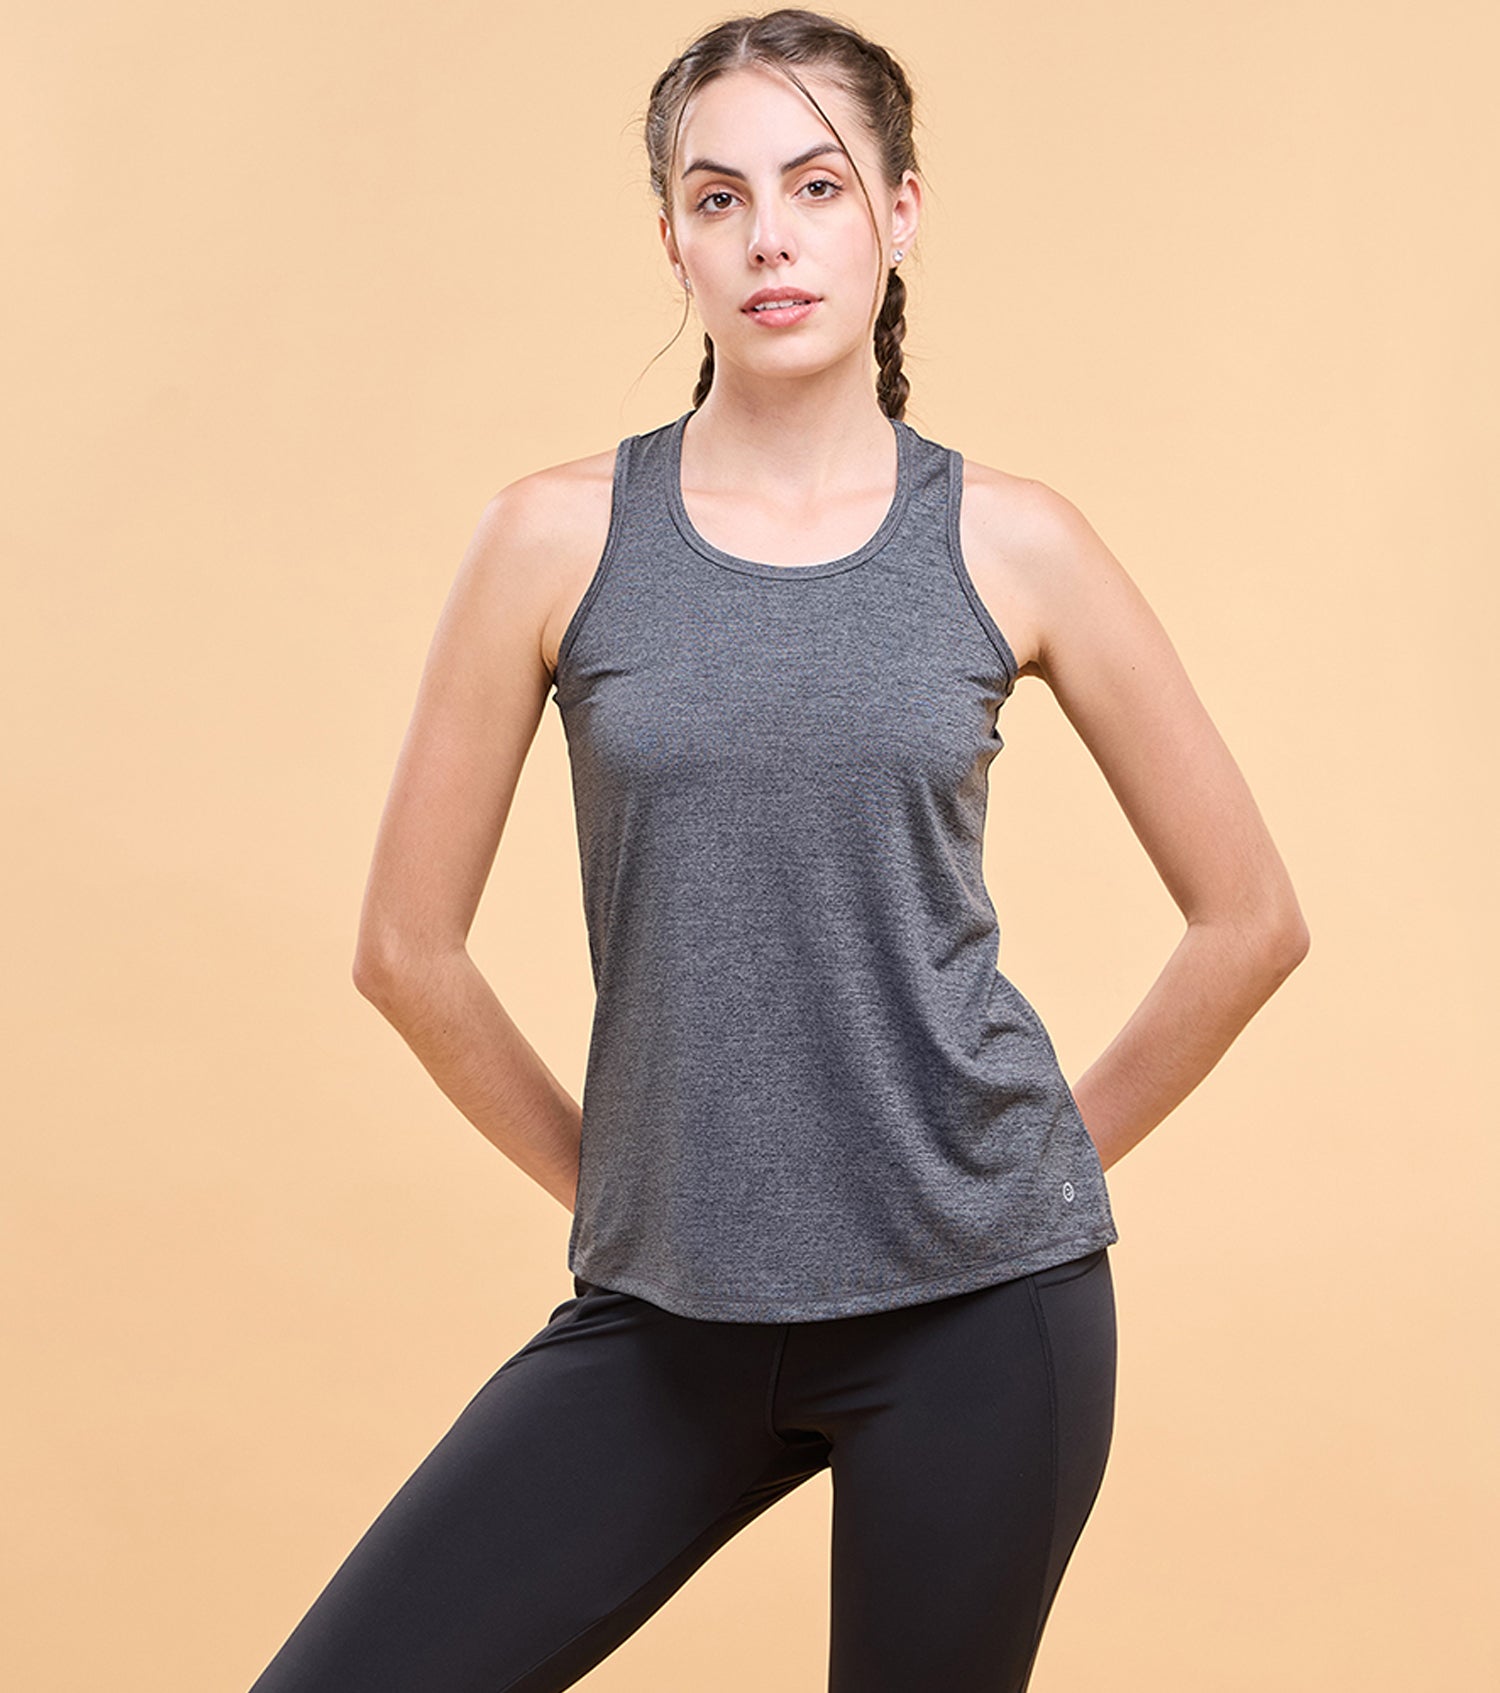 Enamor Womens Athleisure A308- Basic Workout Dry Fit Crew Neck Activewear Tee